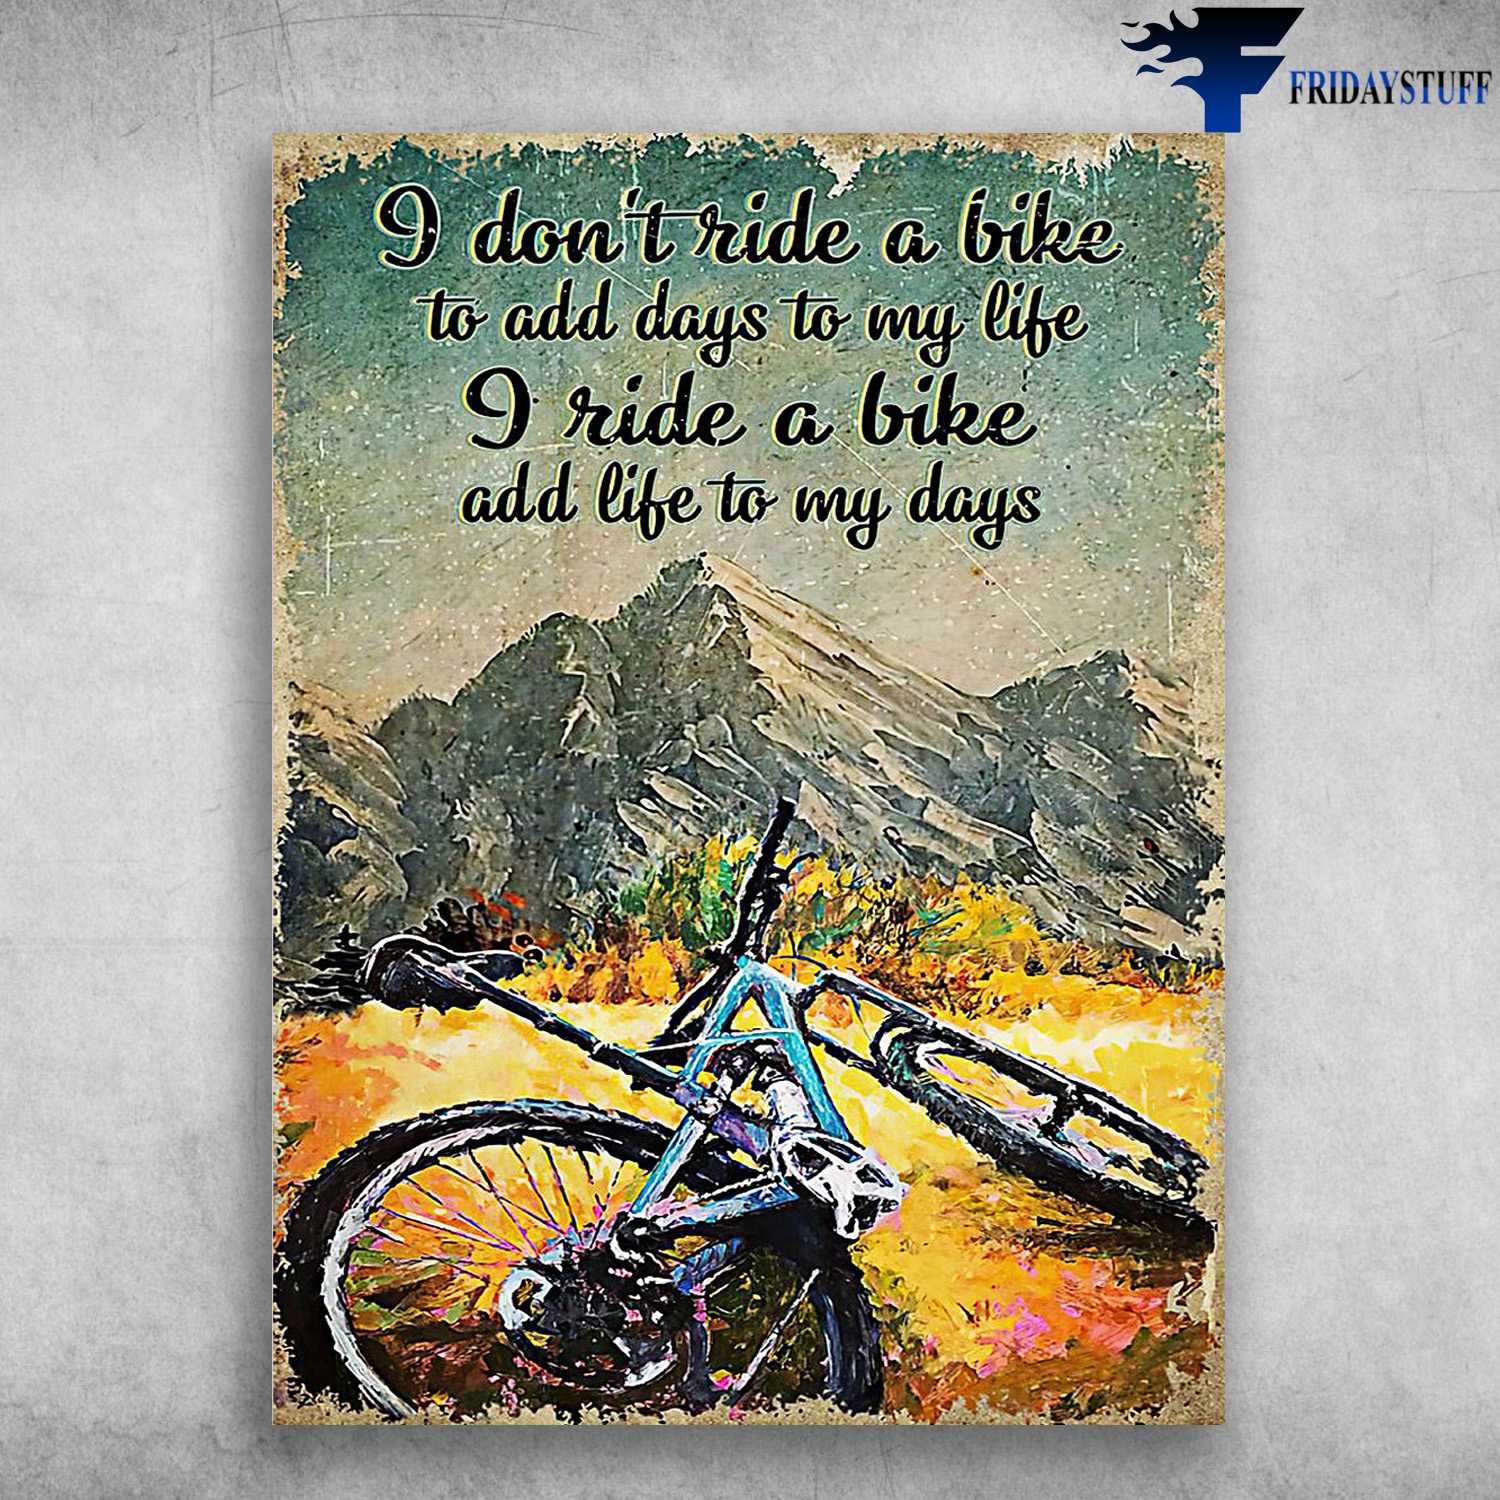 Cycling Poster, Moutain Biking - I Don't Ride A Bike, To Add Days To My Life, I Ride A Bike, Add Life To My Days